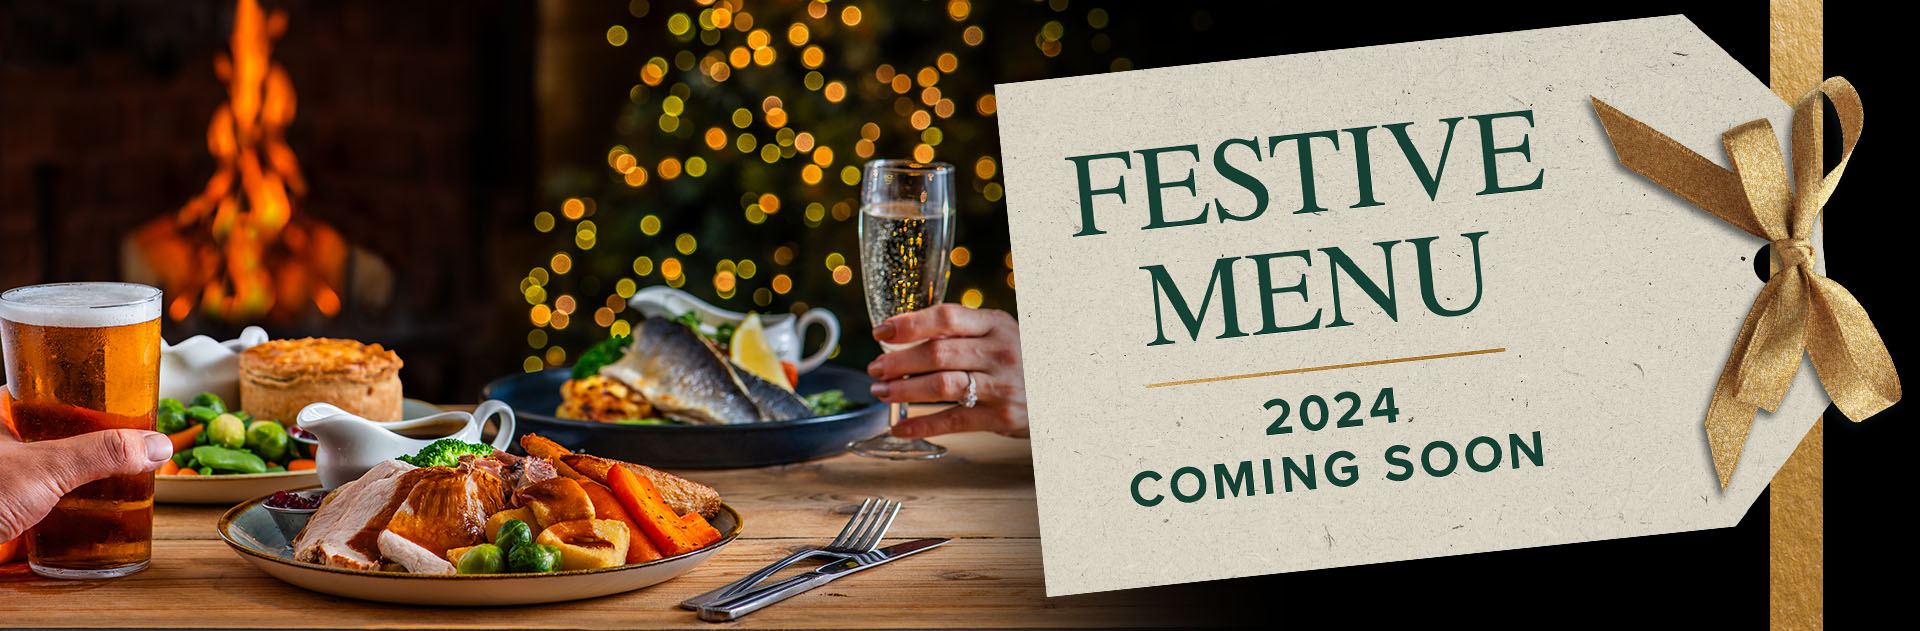 Festive Menu at The Old Red Lion 